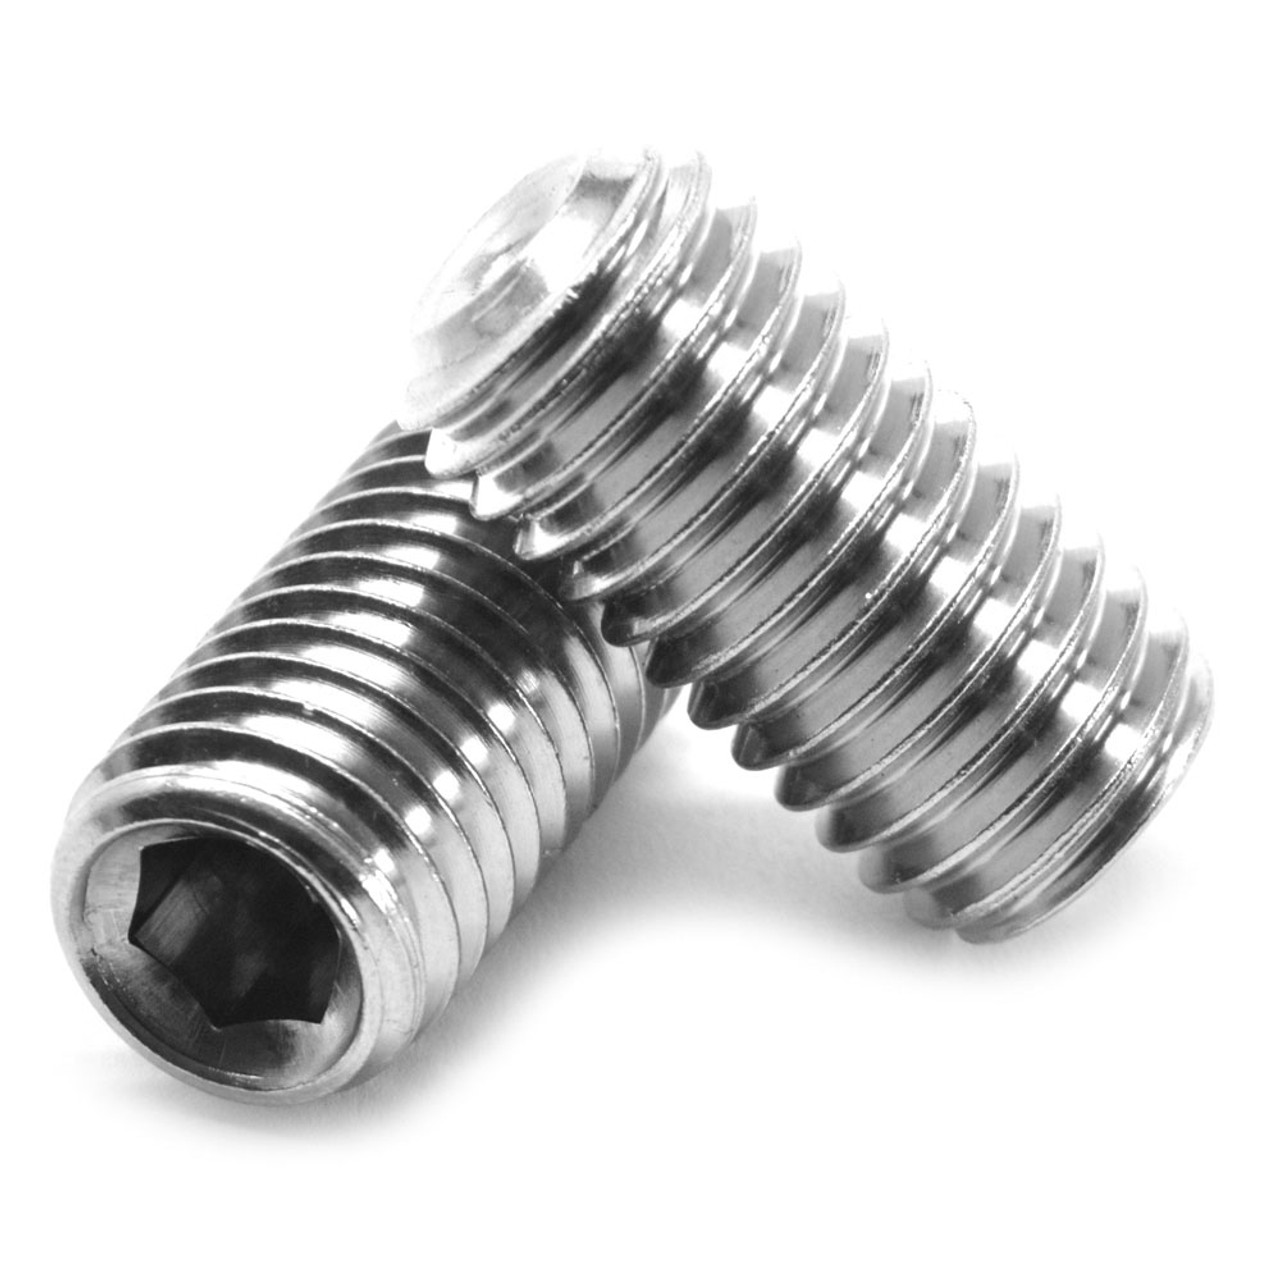 M5 x 0.80 x 16 MM Coarse Thread DIN 916 / ISO 4029 Socket Set Screw Cup Point Stainless Steel 316